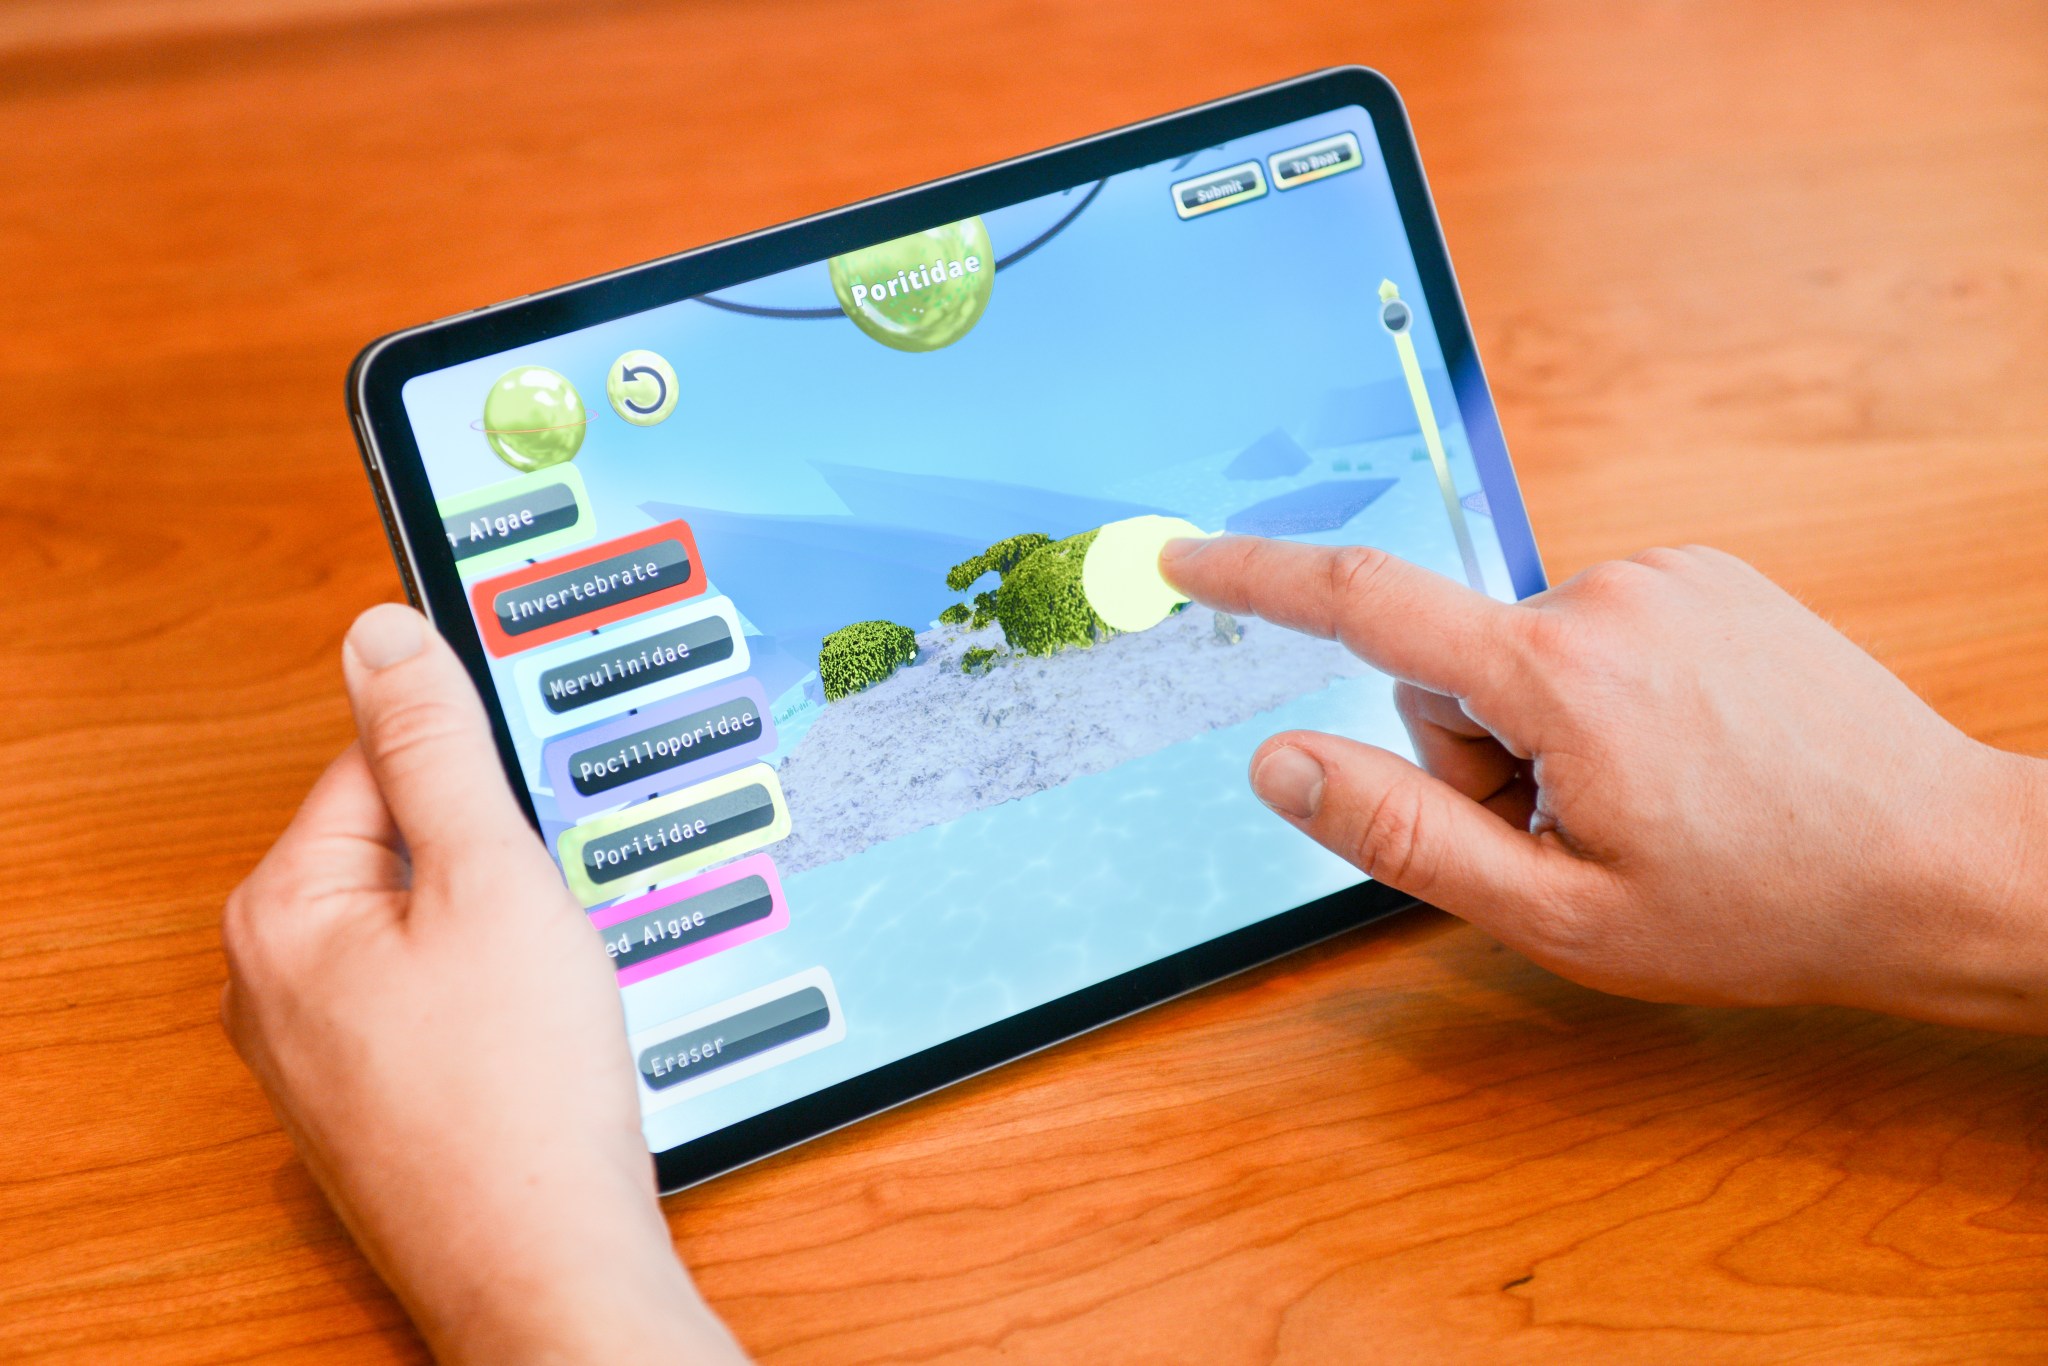 A player interacting with coral imagery on a tablet device on top of a light brown, wooden table.